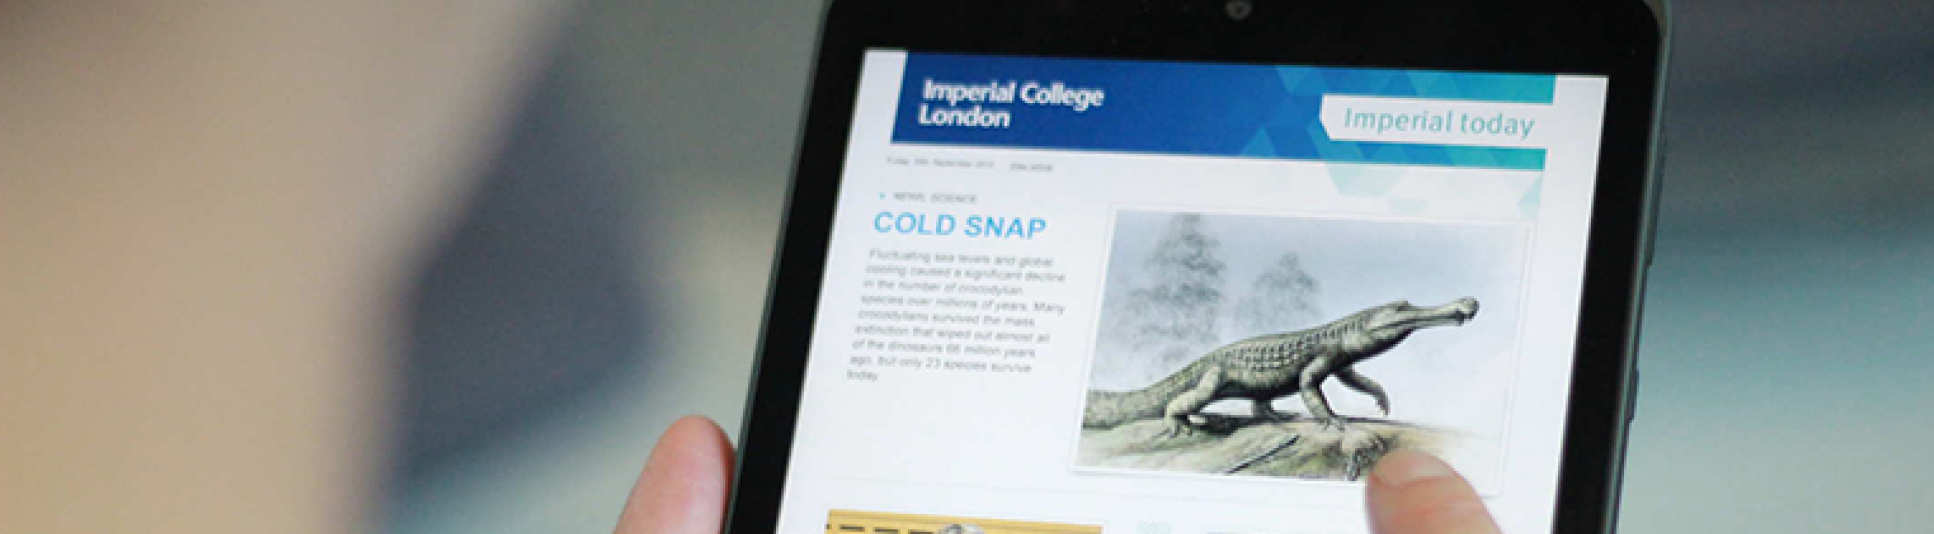 Imperial Today email on a tablet device